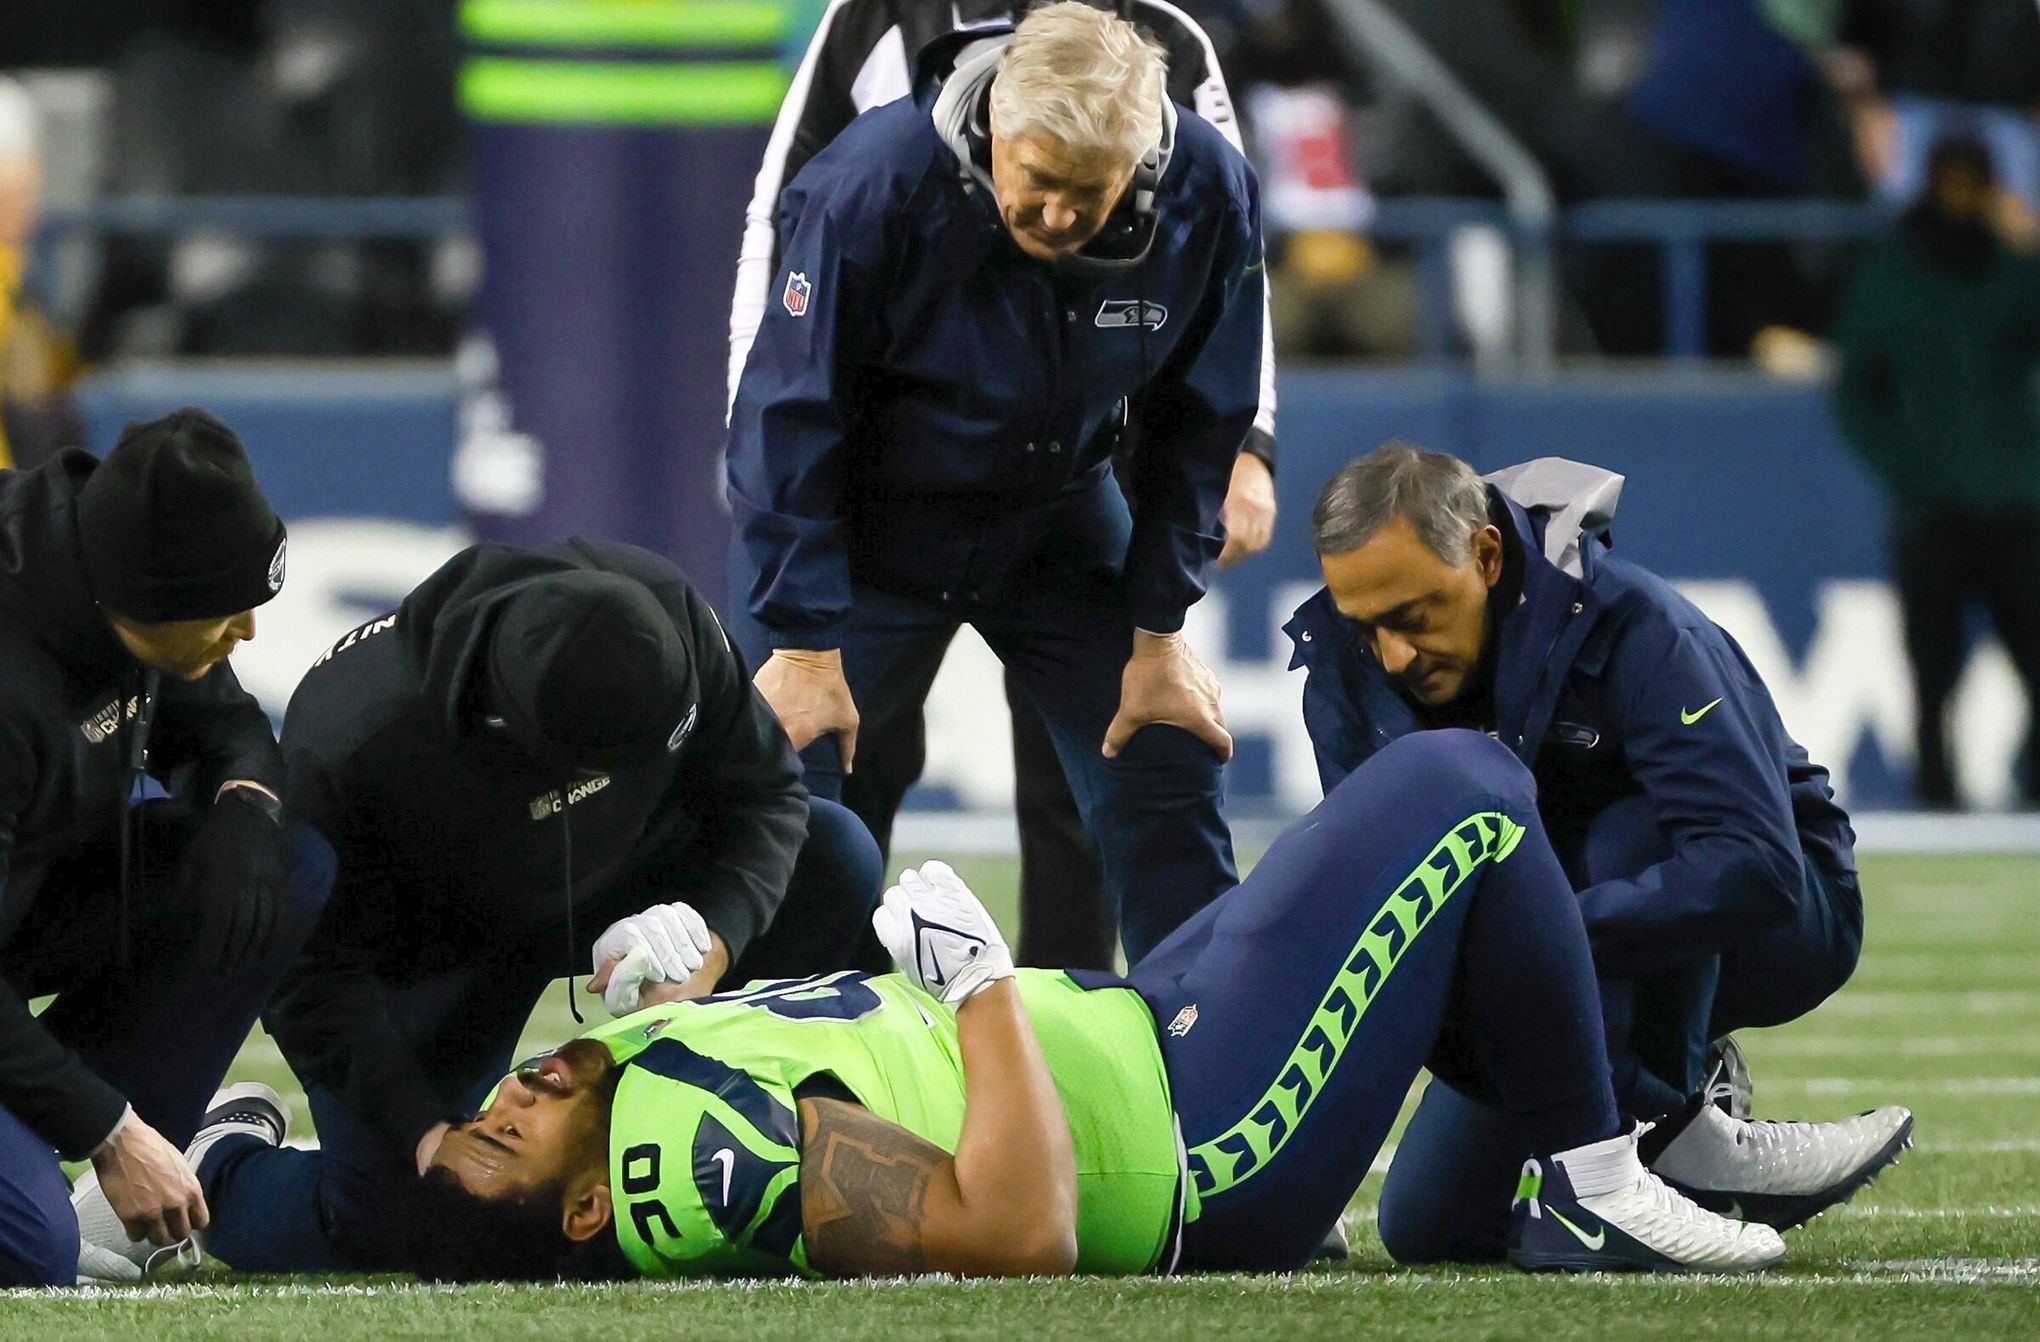 Seahawks nose tackle Bryan Mone leaves 49ers game with ACL injury